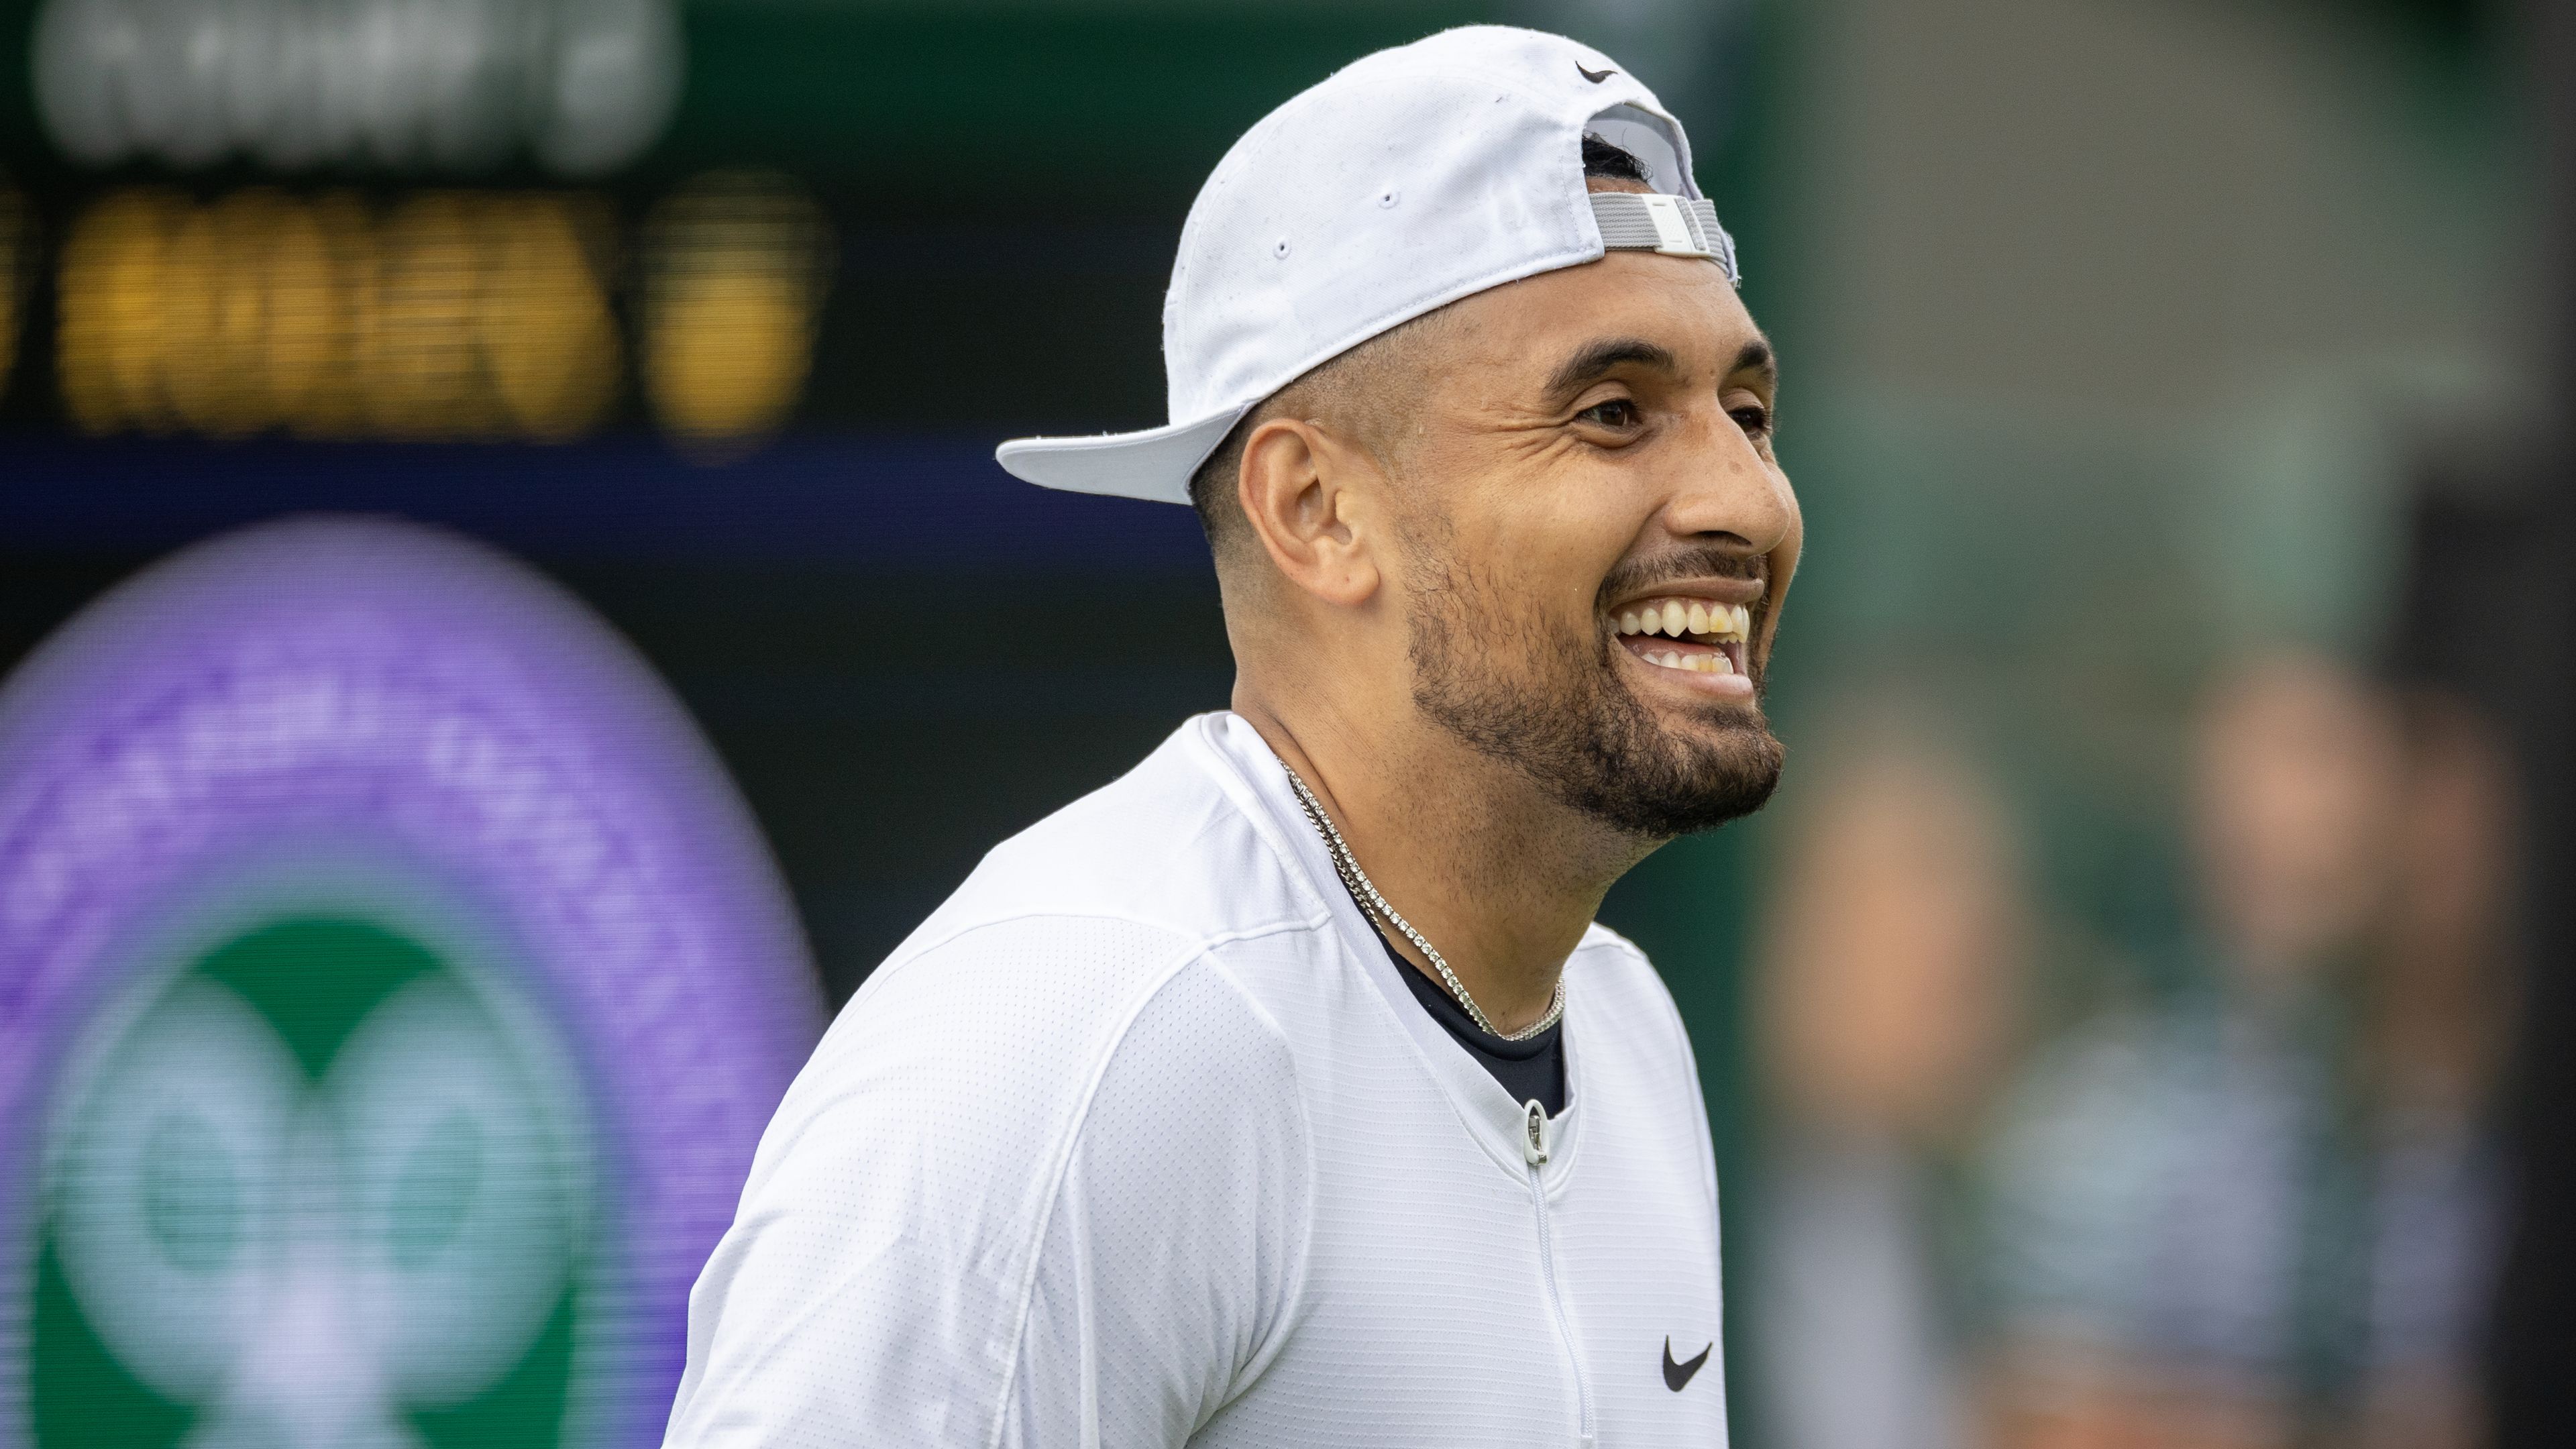 LONDON, ENGLAND - JULY 1.   Nick Kyrgios of Australia in a jovial mood during practice on the outside courts in preparation for the Wimbledon Lawn Tennis Championships at the All England Lawn Tennis and Croquet Club at Wimbledon on July 01, 2023, in London, England. (Photo by Tim Clayton/Corbis via Getty Images)